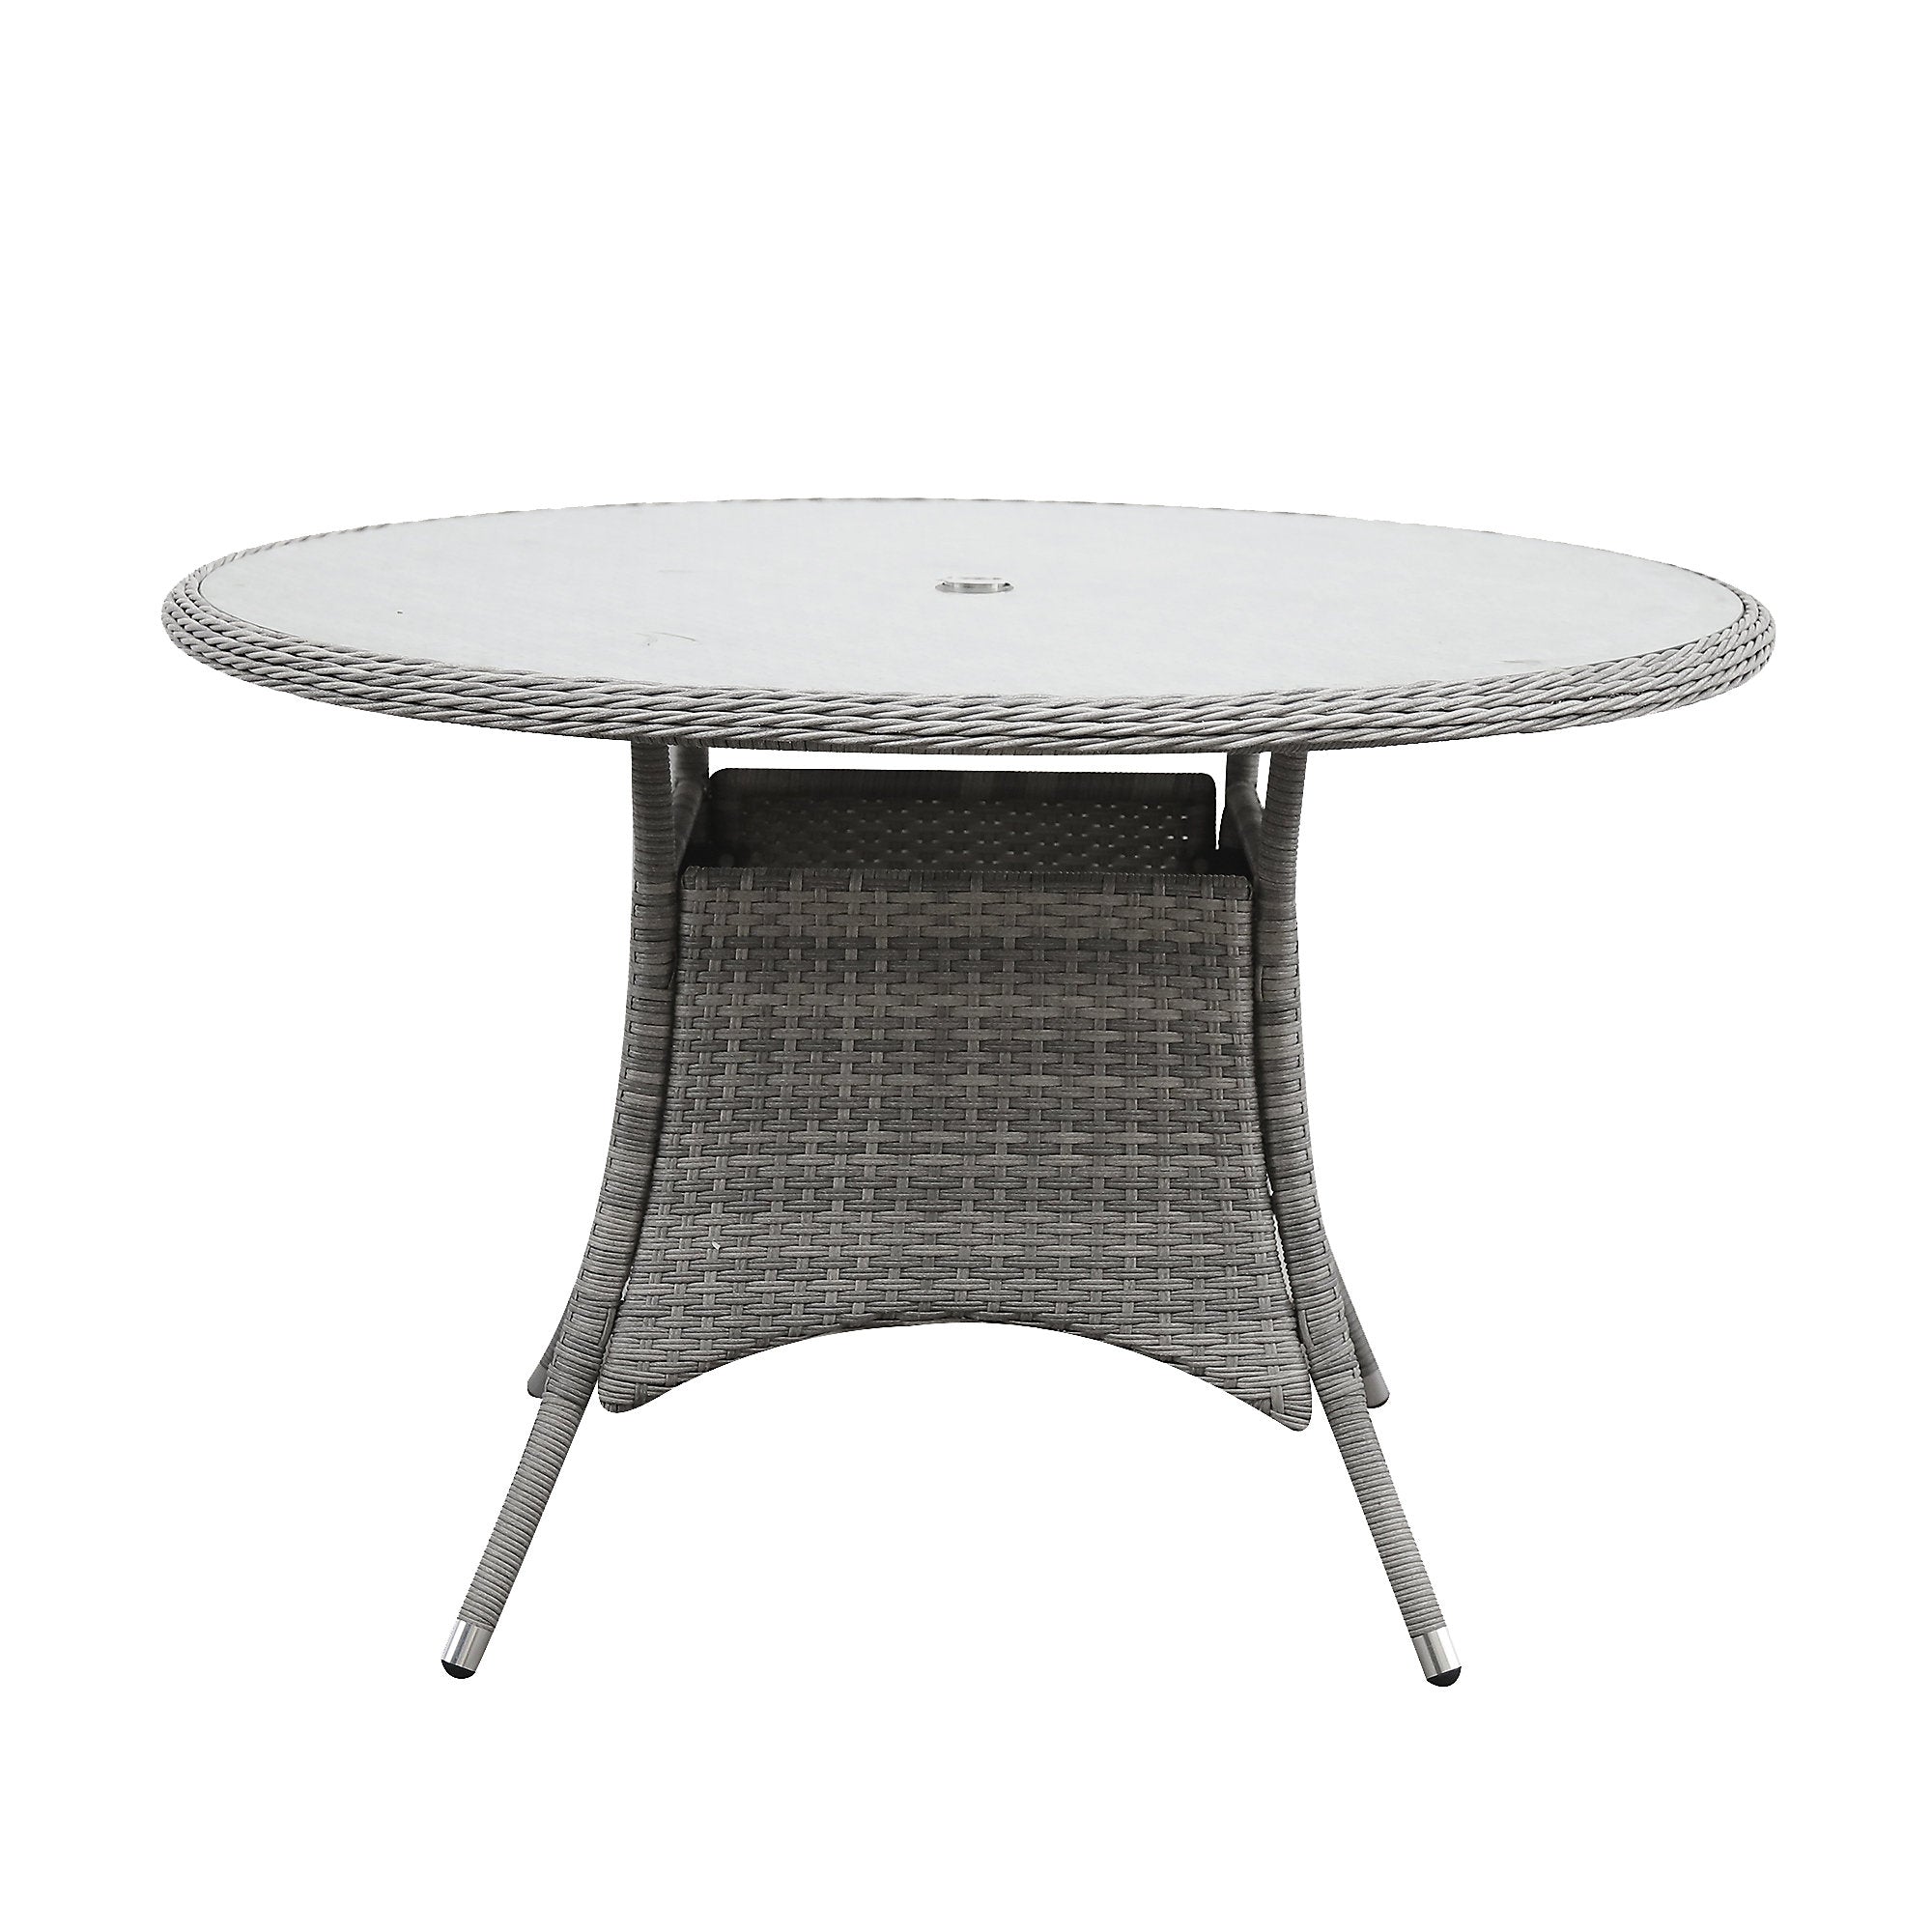 GoodHome Hamilton Rattan effect 4 seater Fixed Dining table, Rattan Garden Table 2589